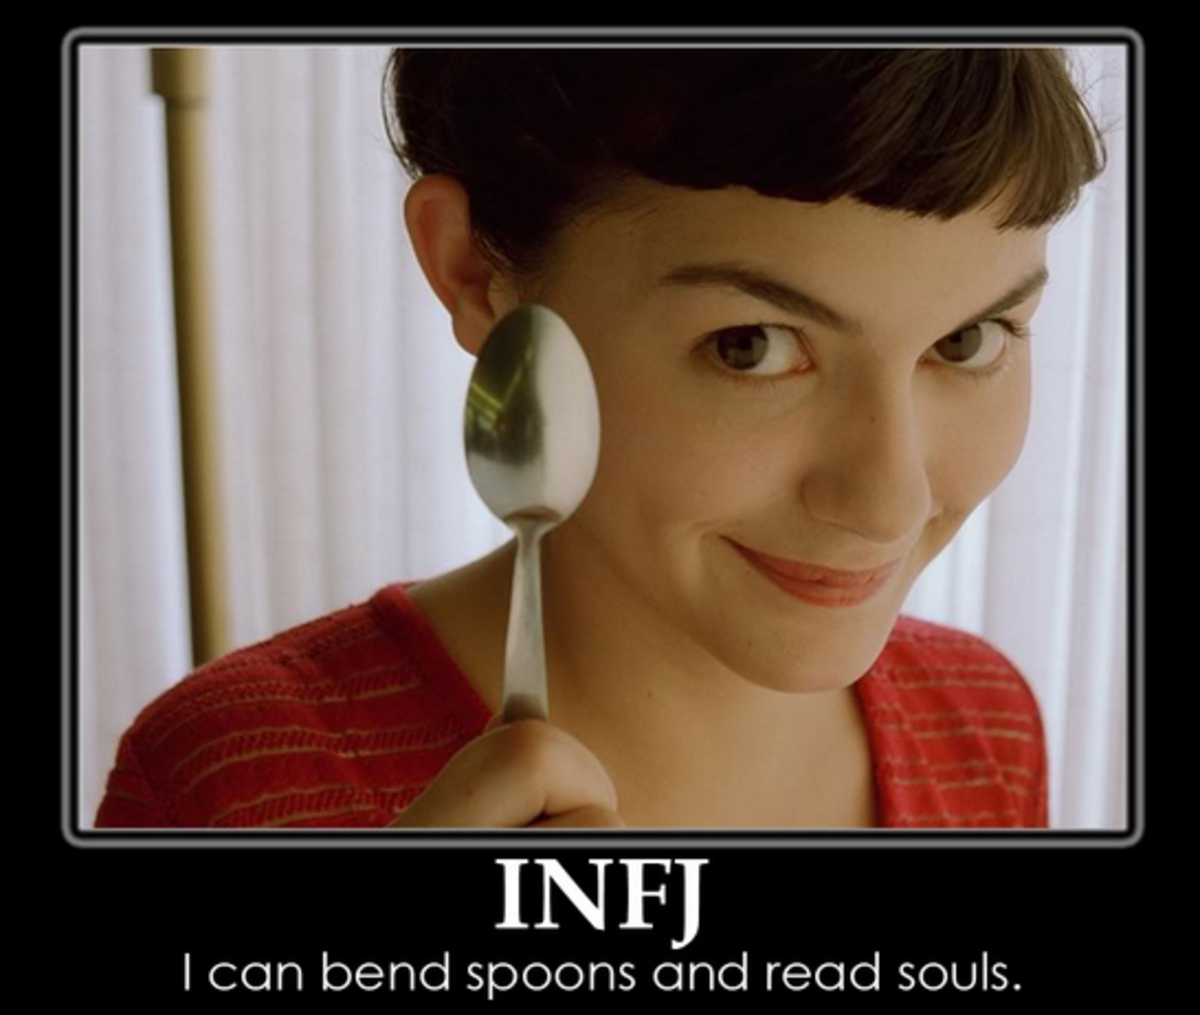 What does Intuition mean in Myers Briggs?